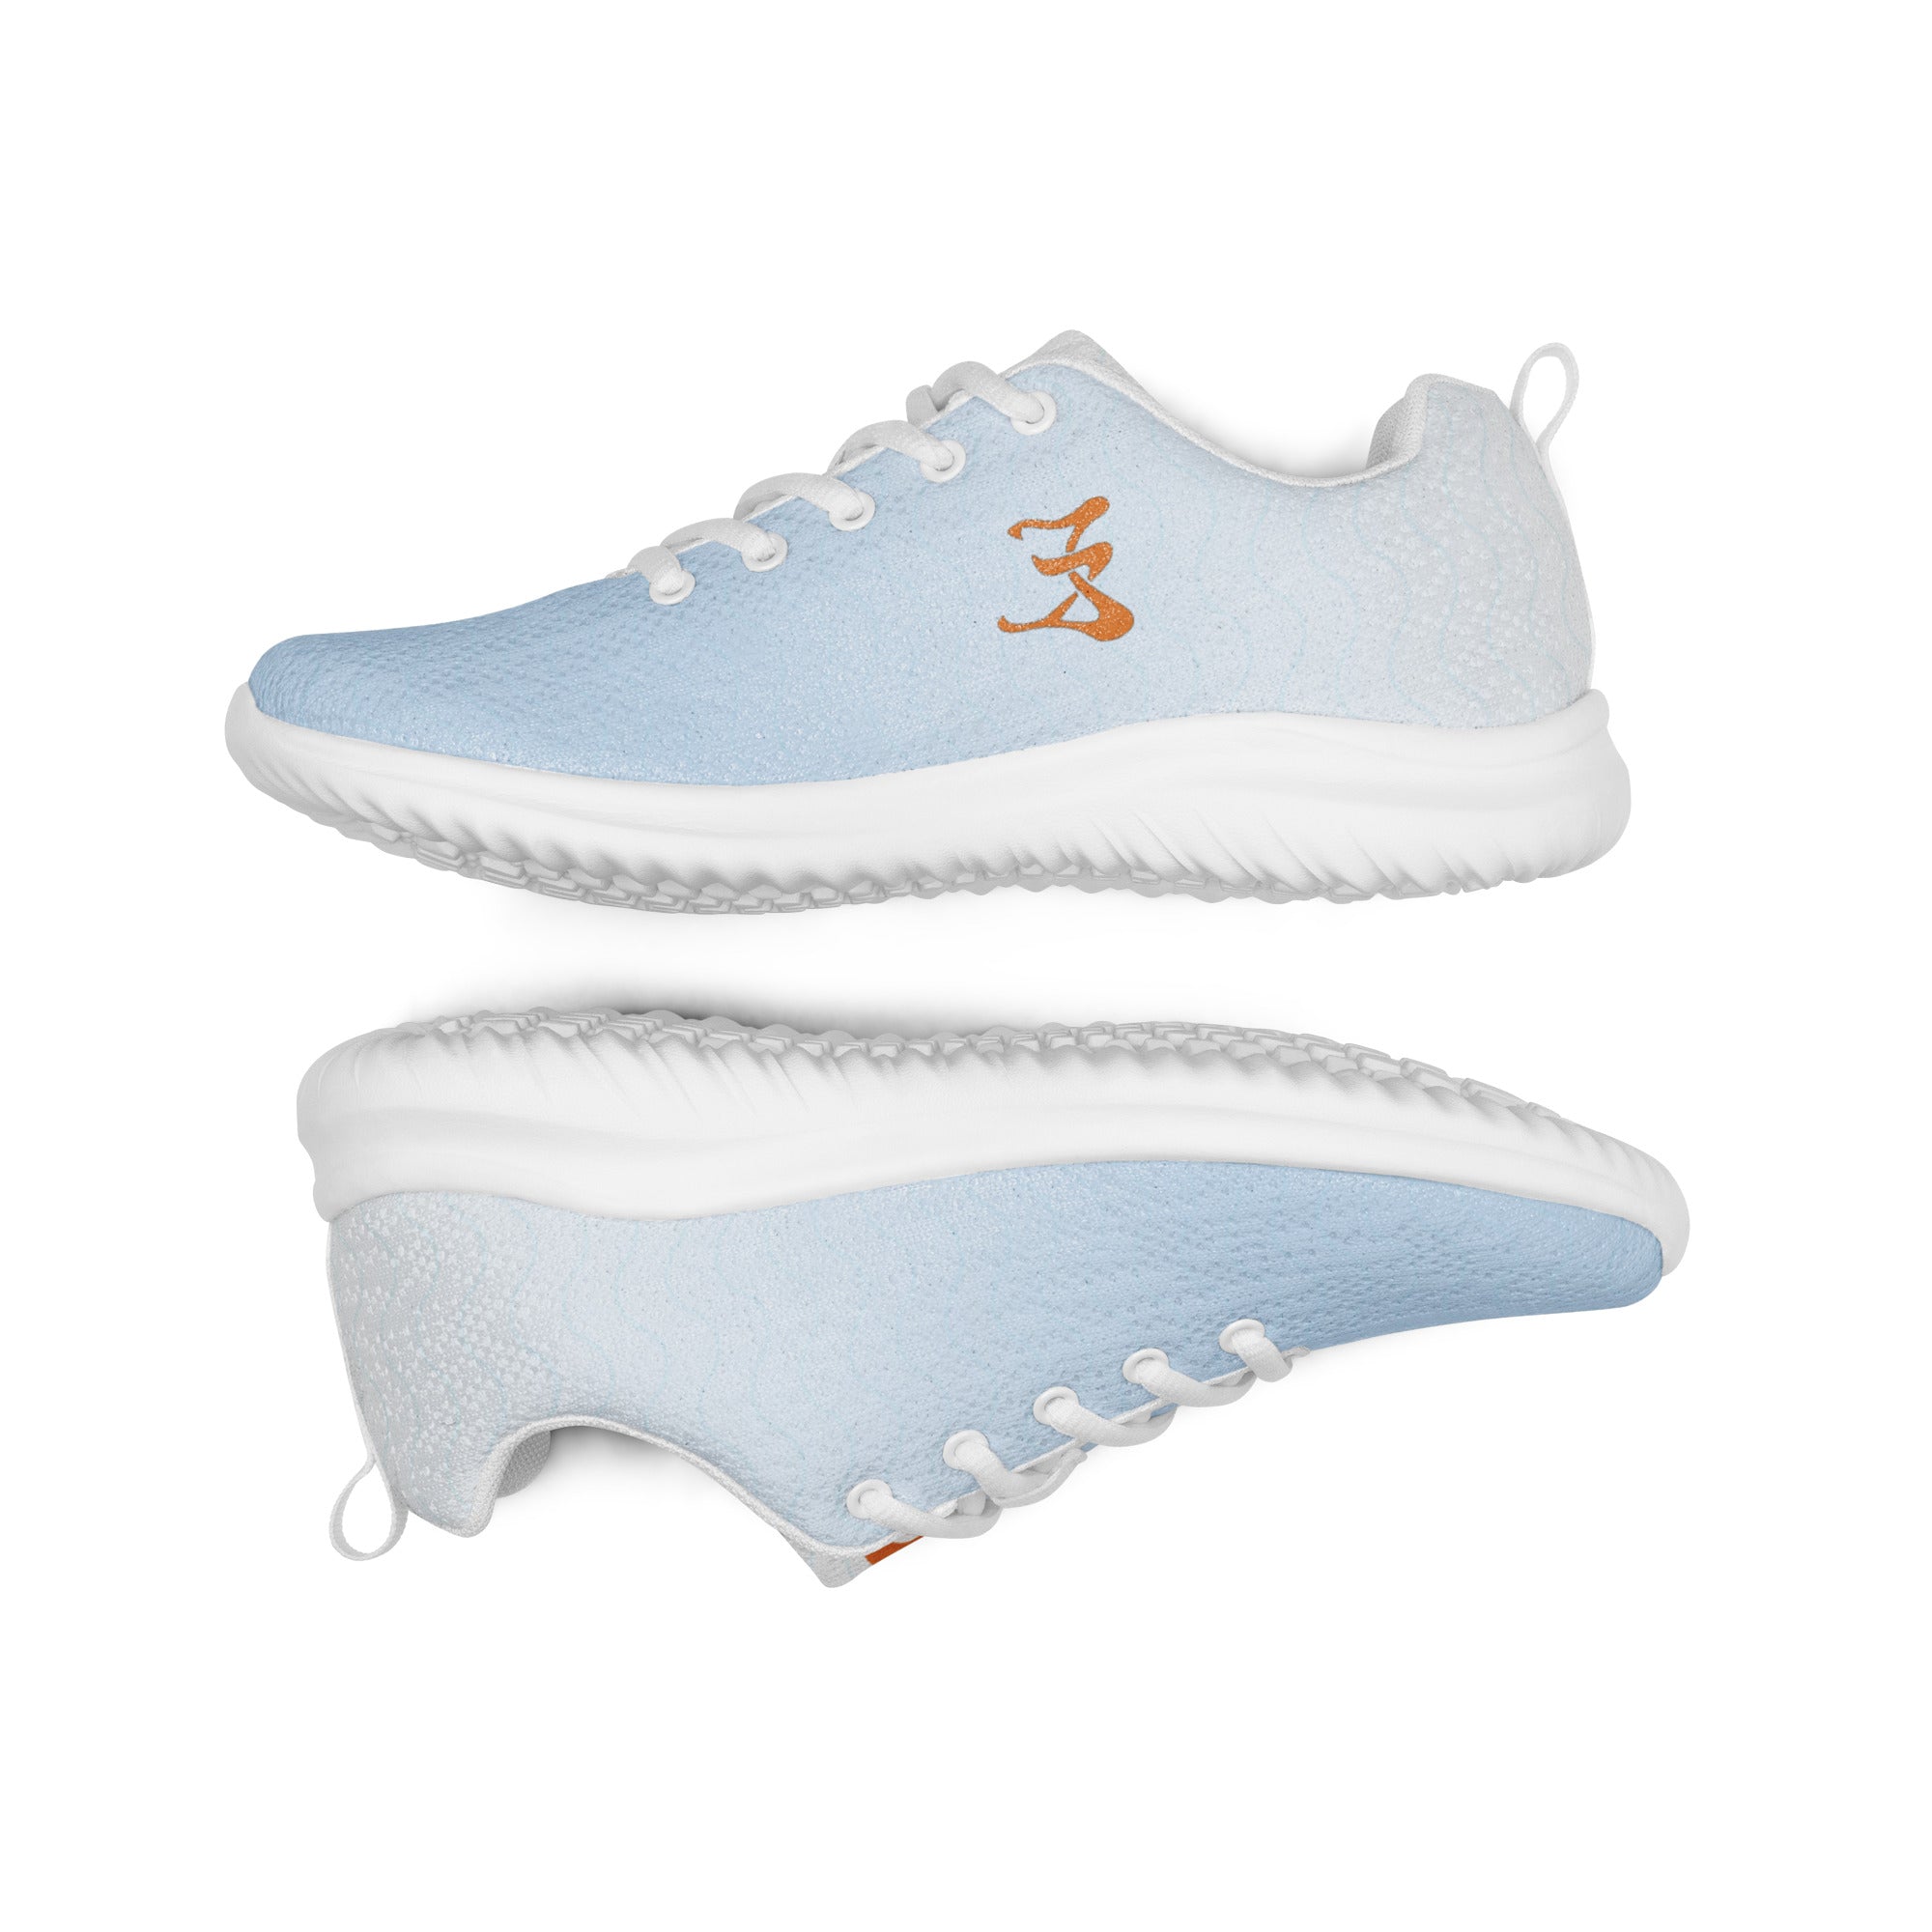 Men’s athletic walking shoes baby blue